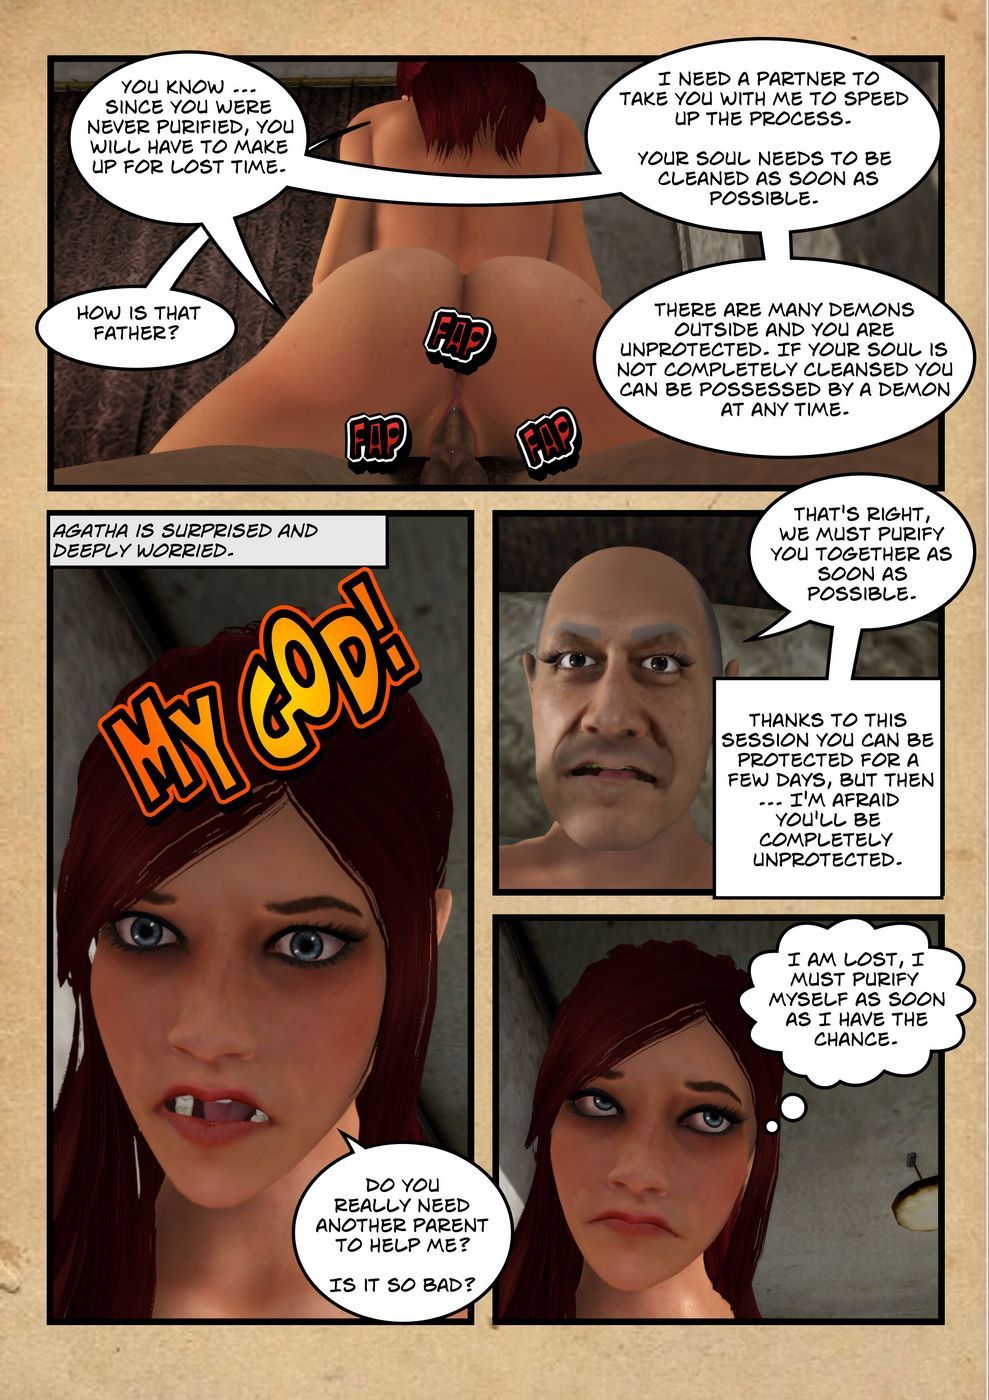 Testing The Faith - Supersoft2 page 6